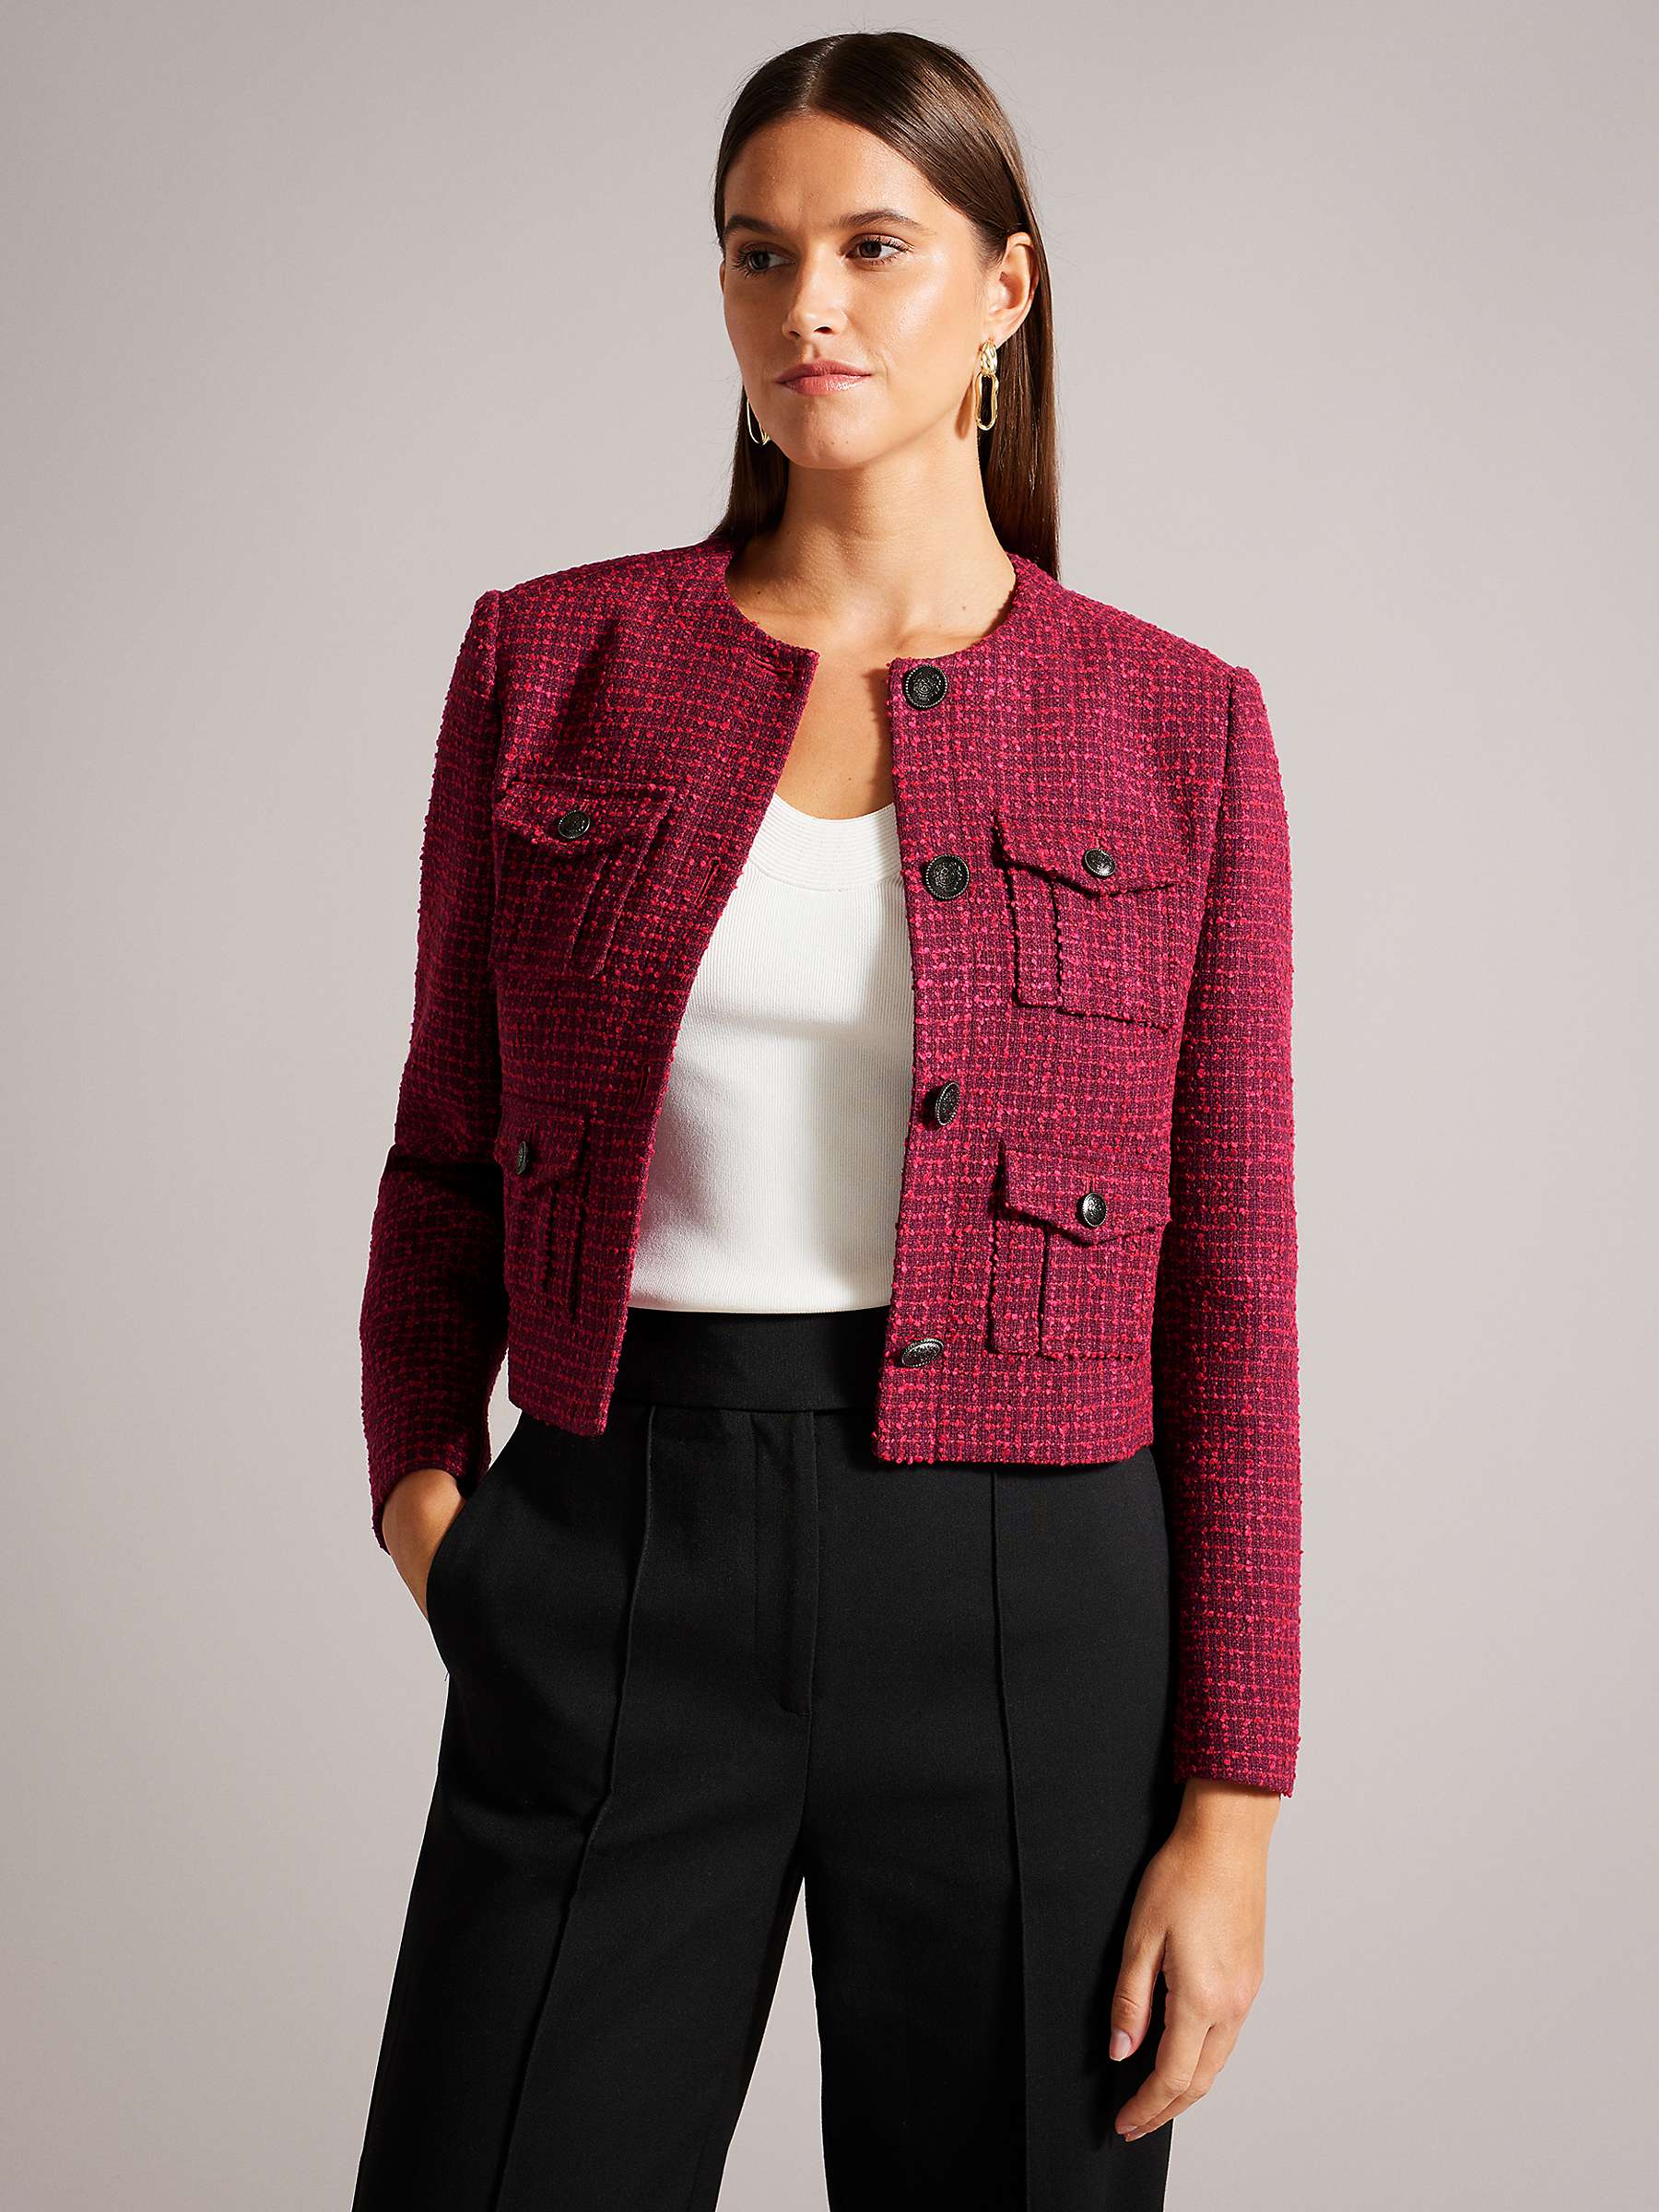 How to Style a Bouclé Jacket: 7 Looks to Try